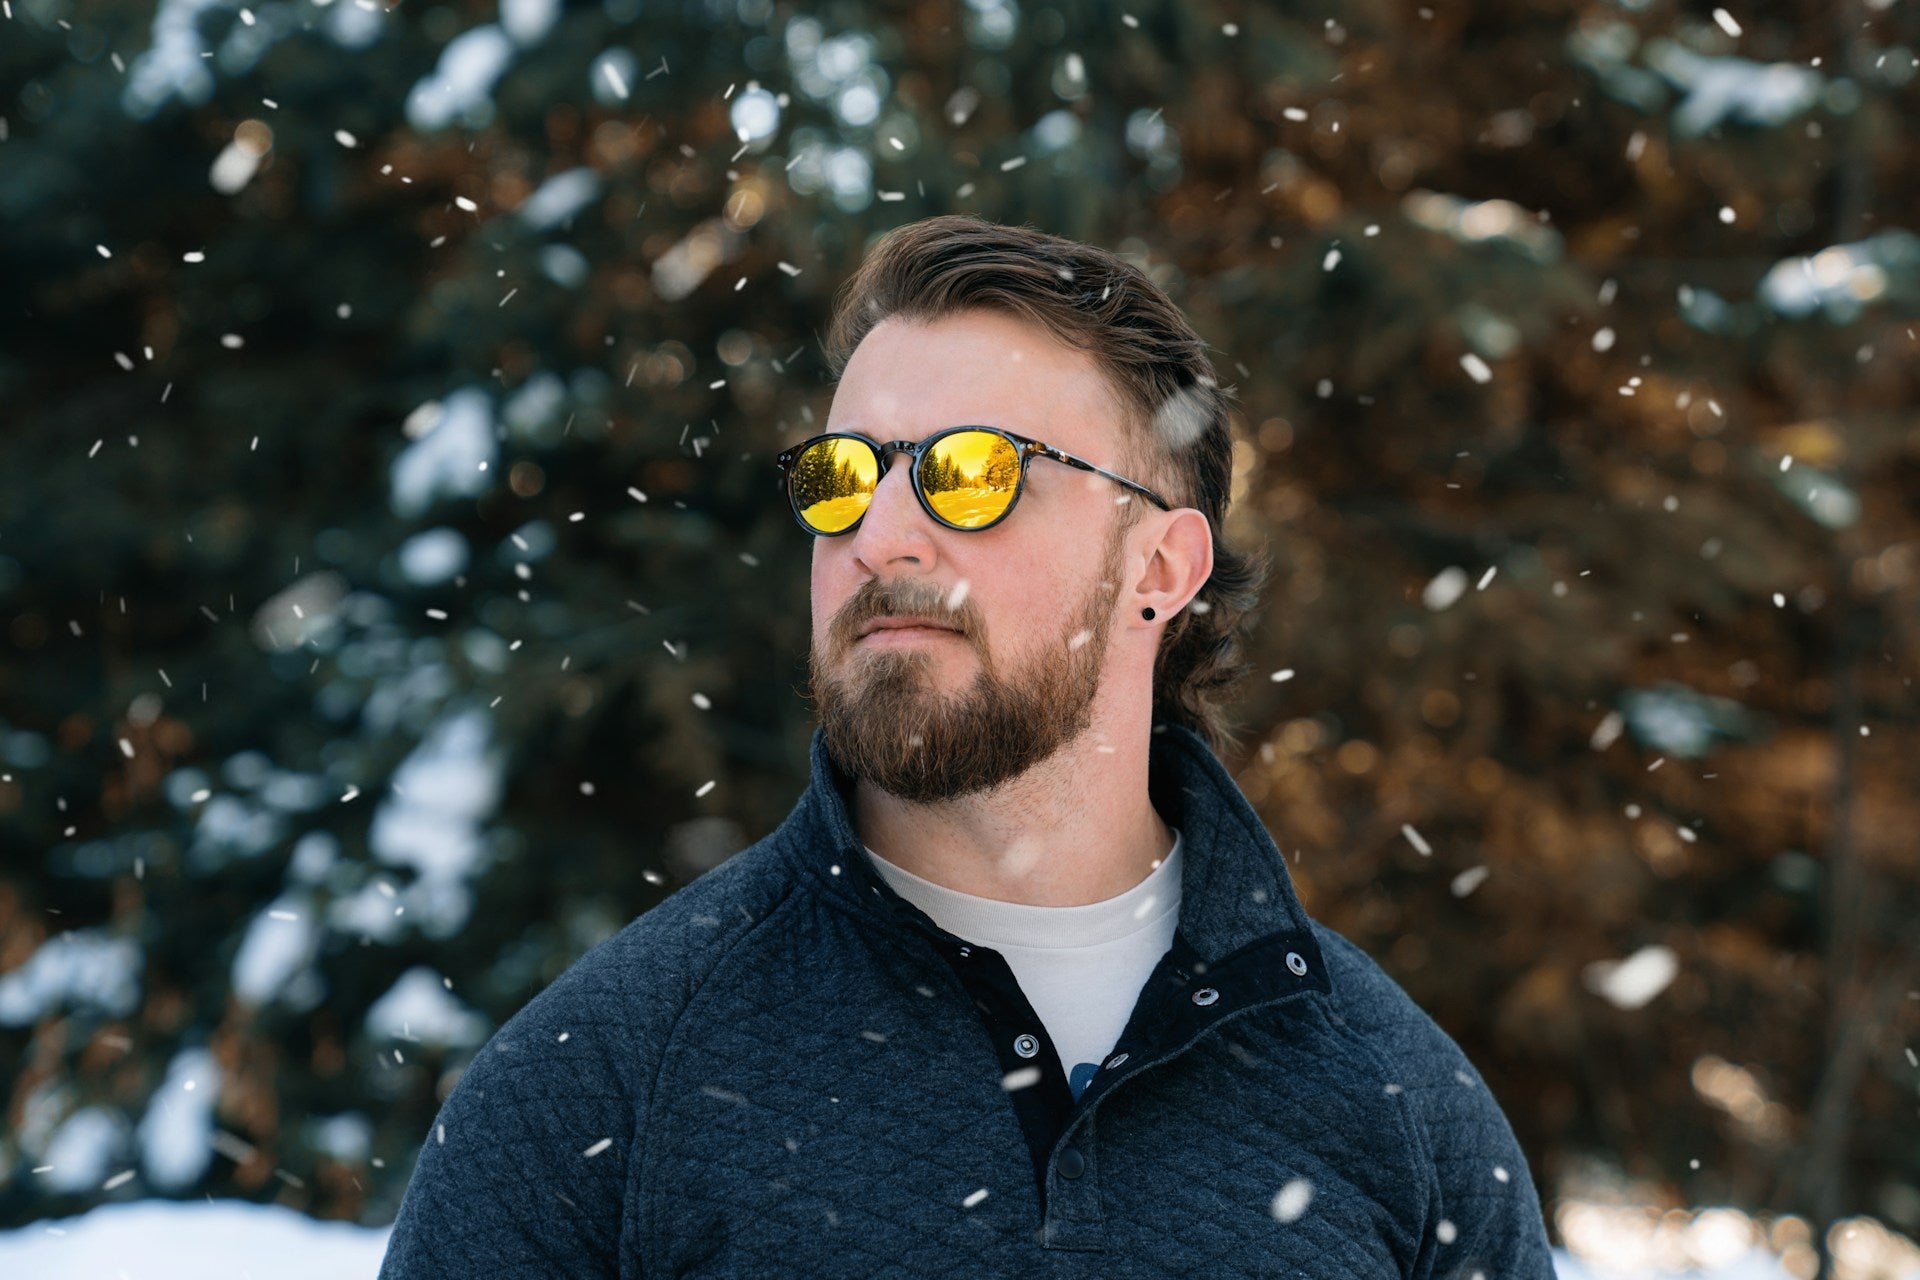 Man standing in the snow with sunglasses on